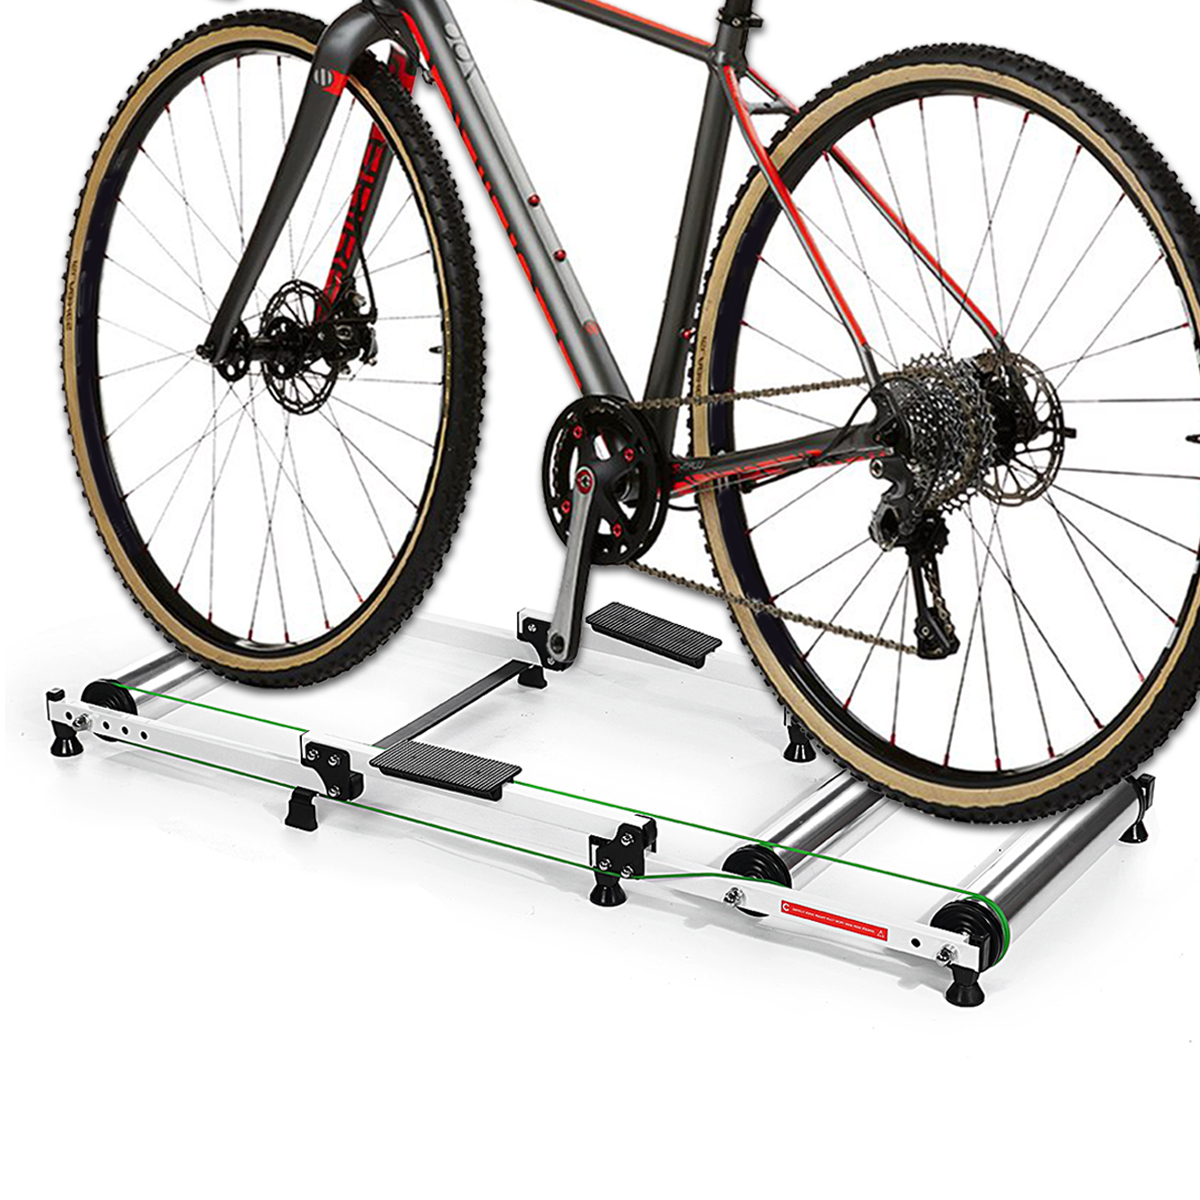 Riding-Bike-Trainer-Roller-Training-Bicycle-Indoor-Cycling-Platform-Home-Gym-1748313